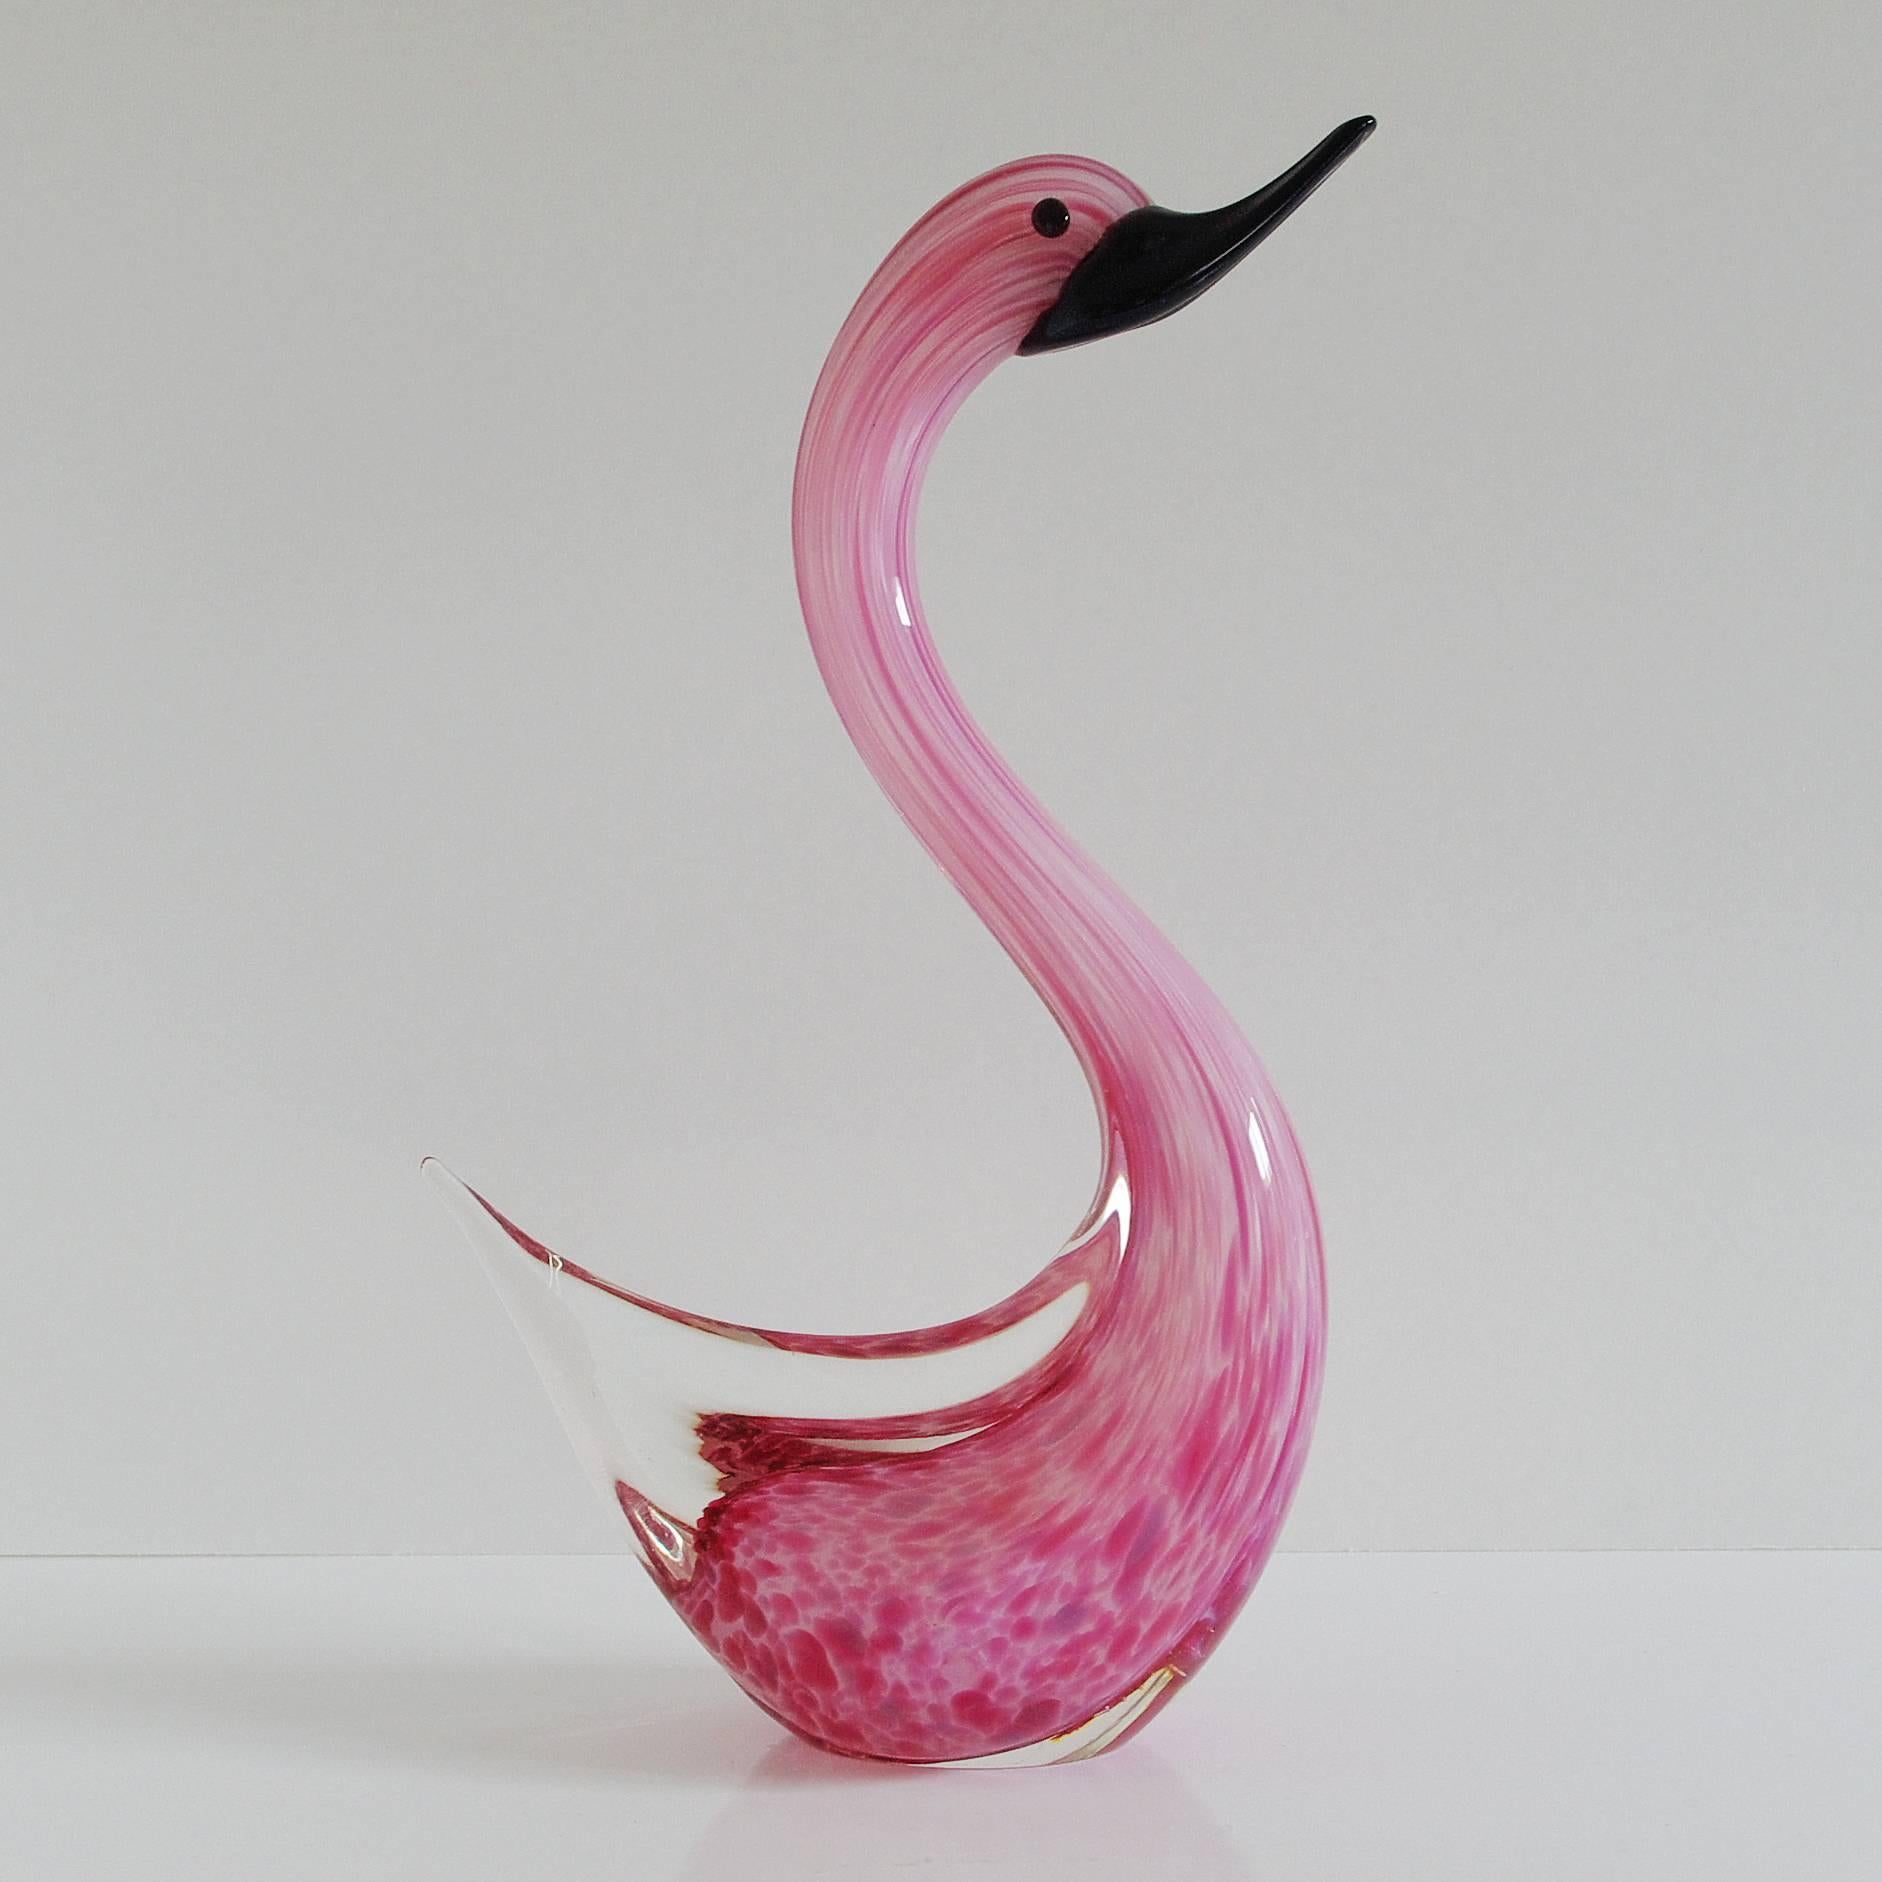 Original vintage pink Murano glass swans. Made in Italy in the 1960s.
Dimensions: Left Swan: Height 12 inches / width 8 inches / depth 3.5 inches
Right Swan: Height 12 inches / width 10 inches / depth 4 inches
One set in stock in Palm Springs.
Order